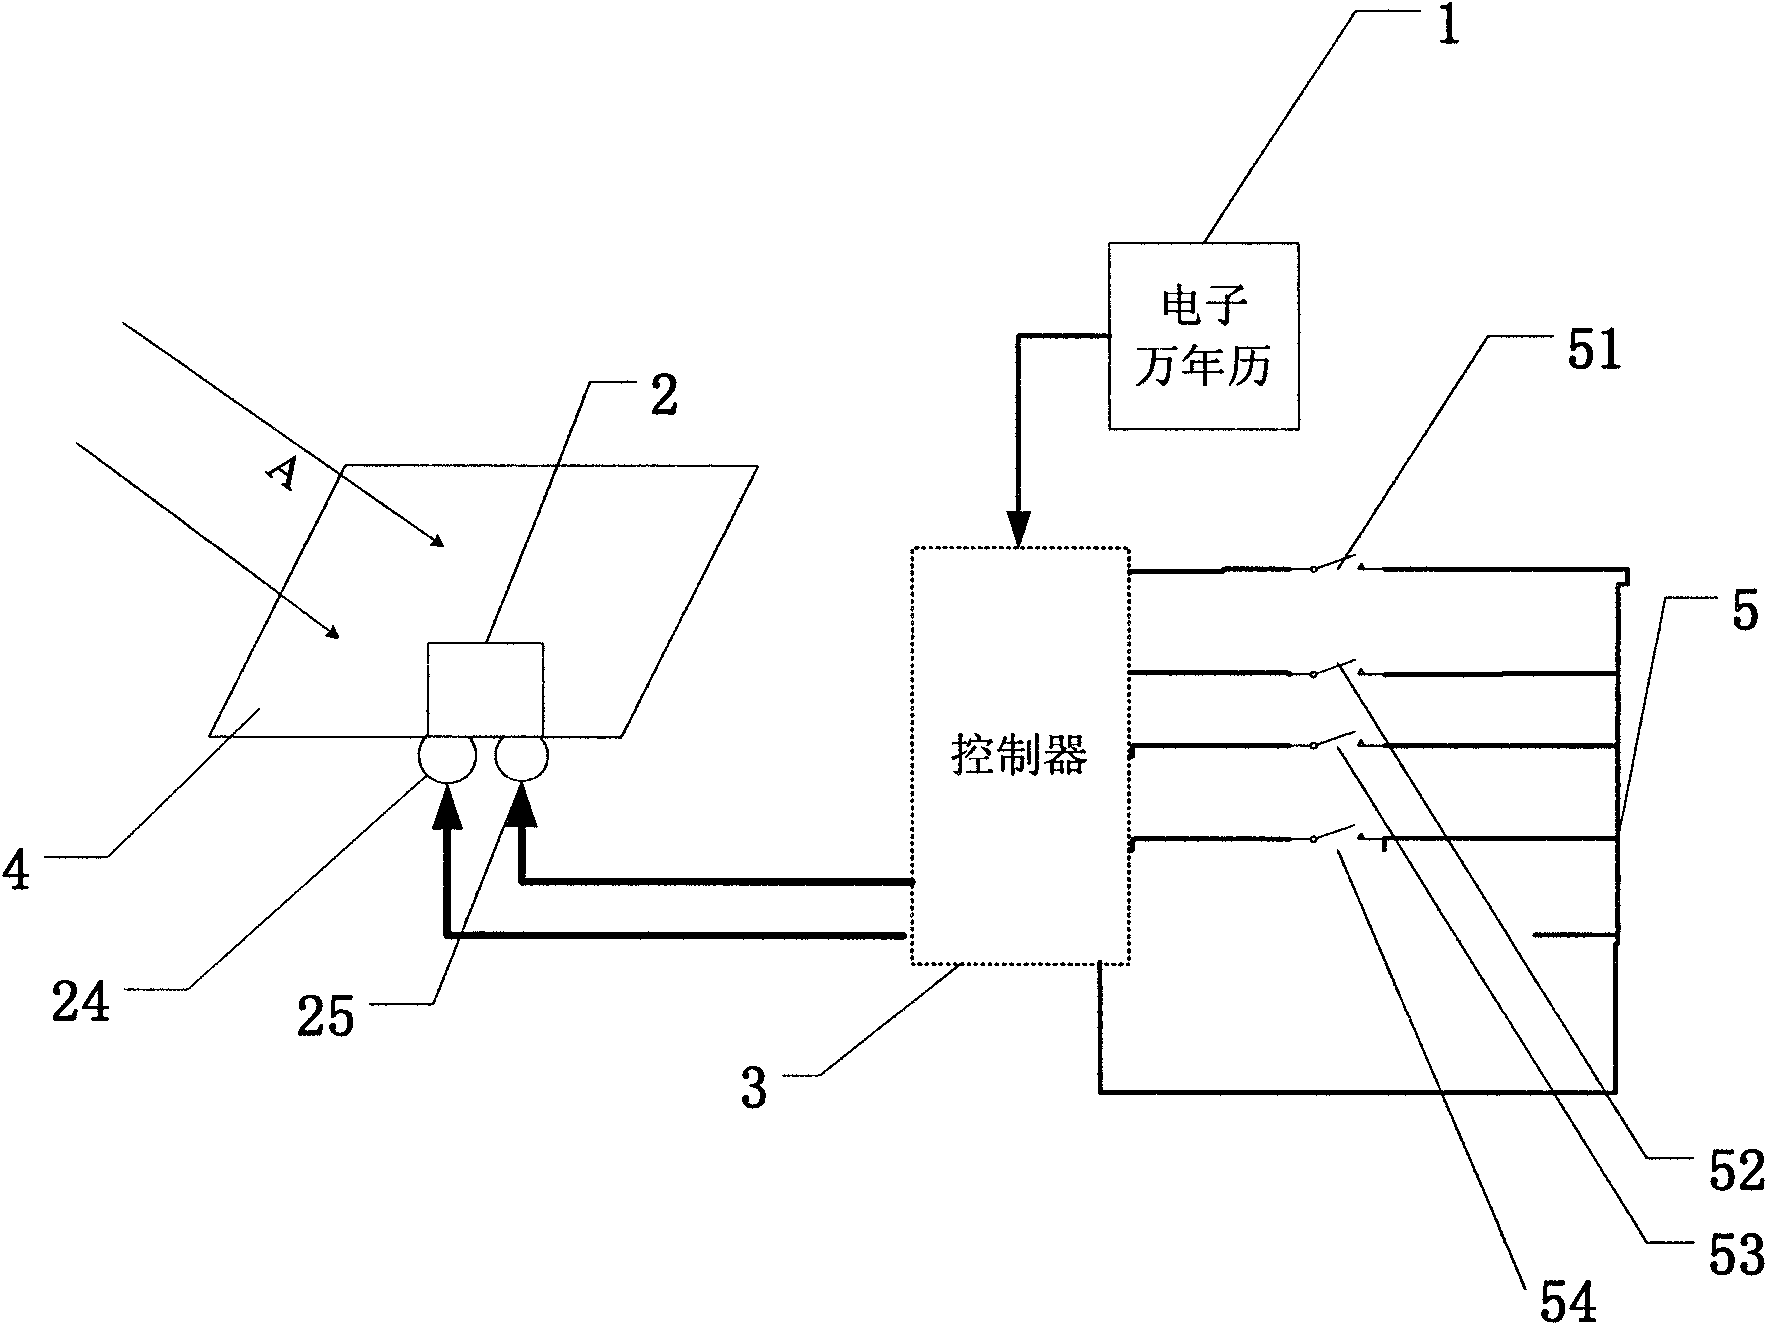 Active solar energy tracing method and device